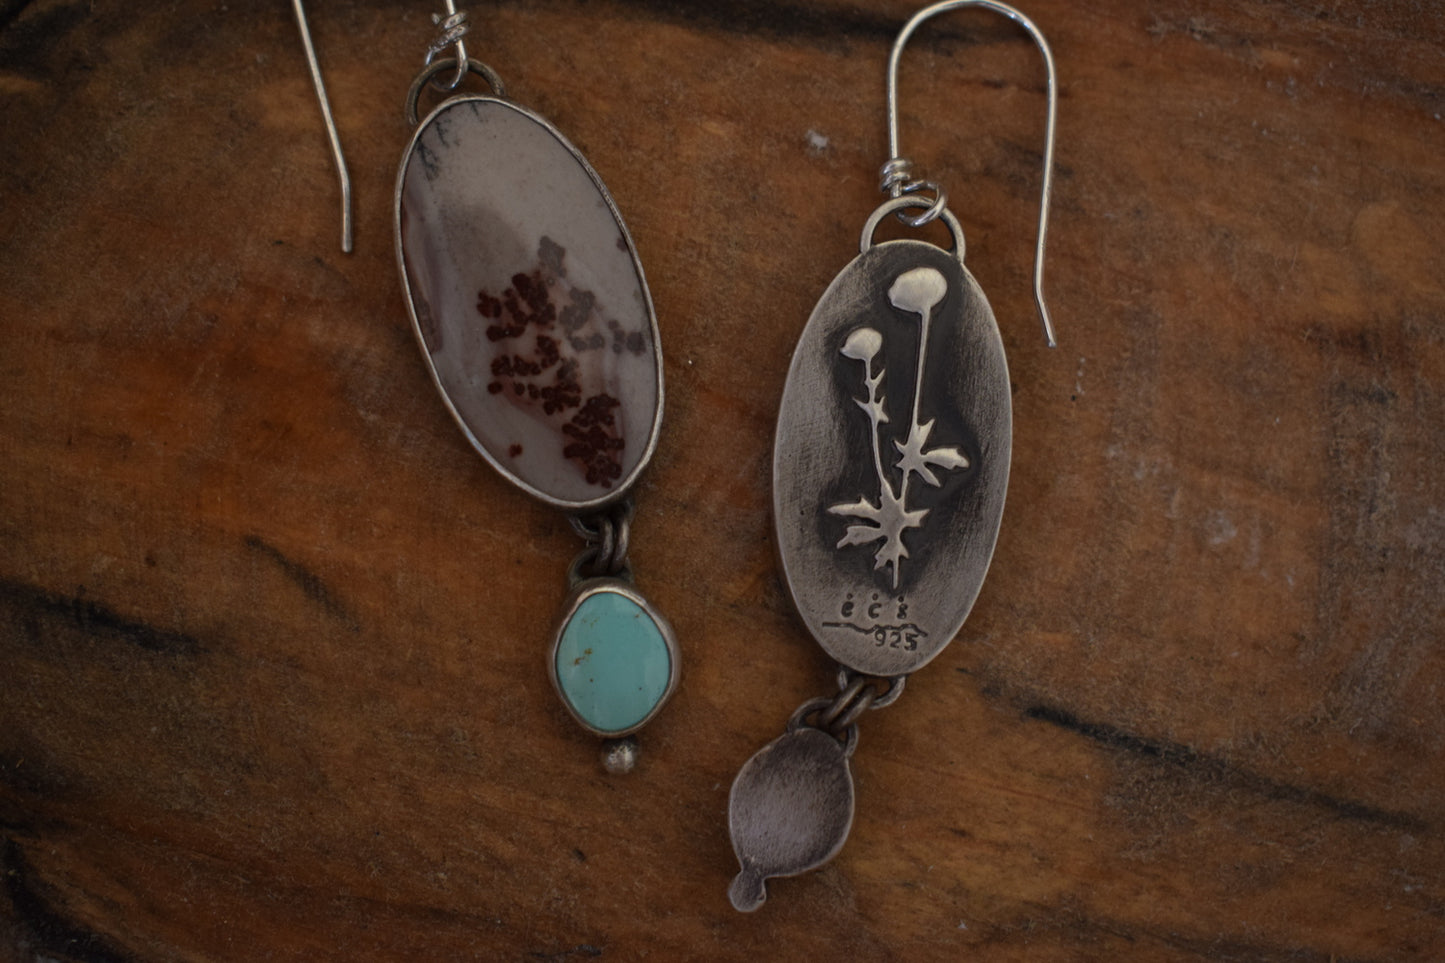 These earrings have two large maroon and grey stones with a marbled print, below them hangs light green turquoise dangles with small silver dot accents. The backside of the earrings has a small cutout of flowers and their leaves.